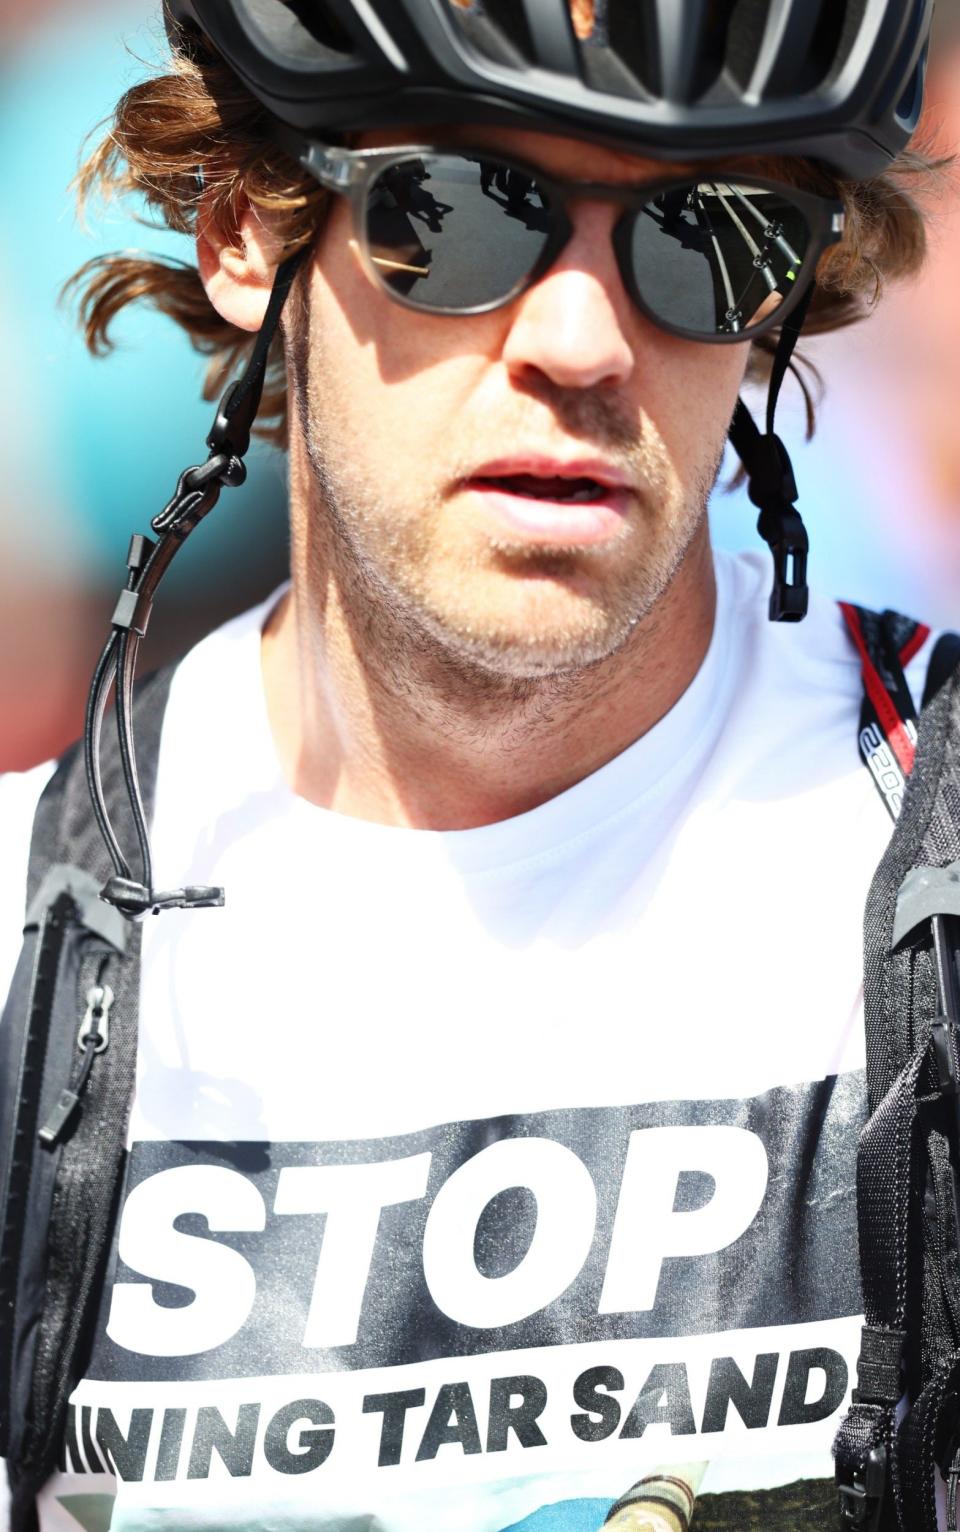 Sebastian Vettel of Germany and Aston Martin F1 Team arrives in the Paddock wearing a shirt with the slogan "Stop Mining Tar Sand" prior to practice ahead of the F1 Grand Prix of Canada at Circuit Gilles Villeneuve on June 17, 2022 in Montreal, Quebec. 